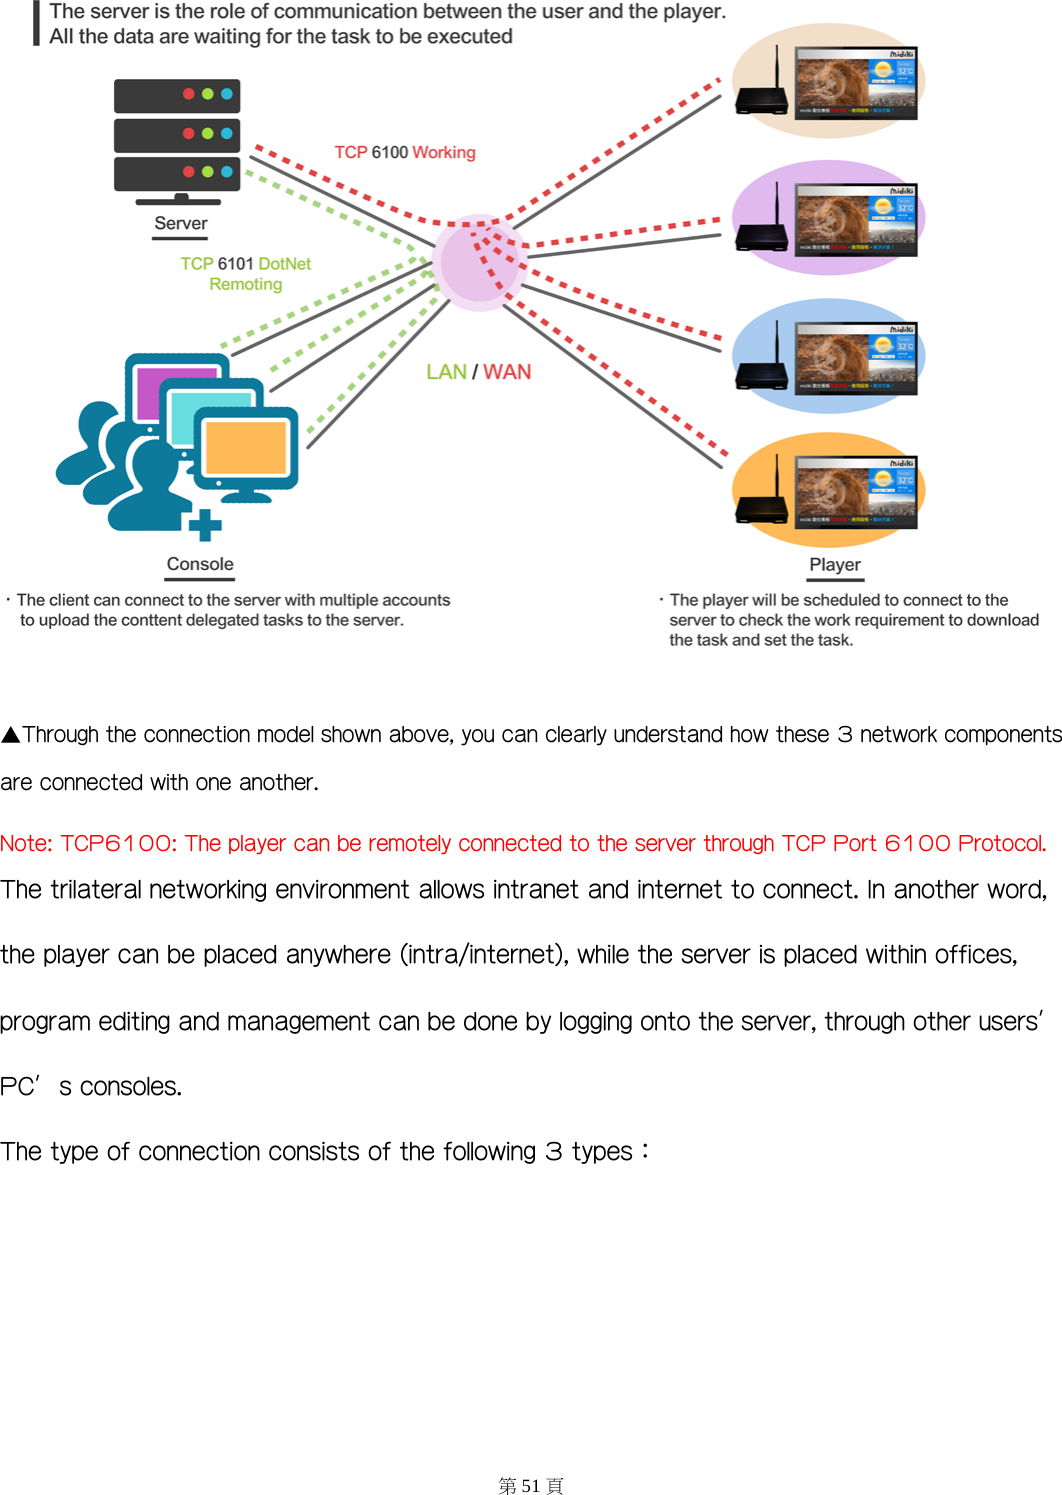  ▲Through the connection model shown above, you can clearly understand how these 3 network components are connected with one another. Note: TCP6100: The player can be remotely connected to the server through TCP Port 6100 Protocol. The trilateral networking environment allows intranet and internet to connect. In another word, the player can be placed anywhere (intra/internet), while the server is placed within offices, program editing and management can be done by logging onto the server, through other users’ PC’s consoles.  The type of connection consists of the following 3 types：  第51 頁 